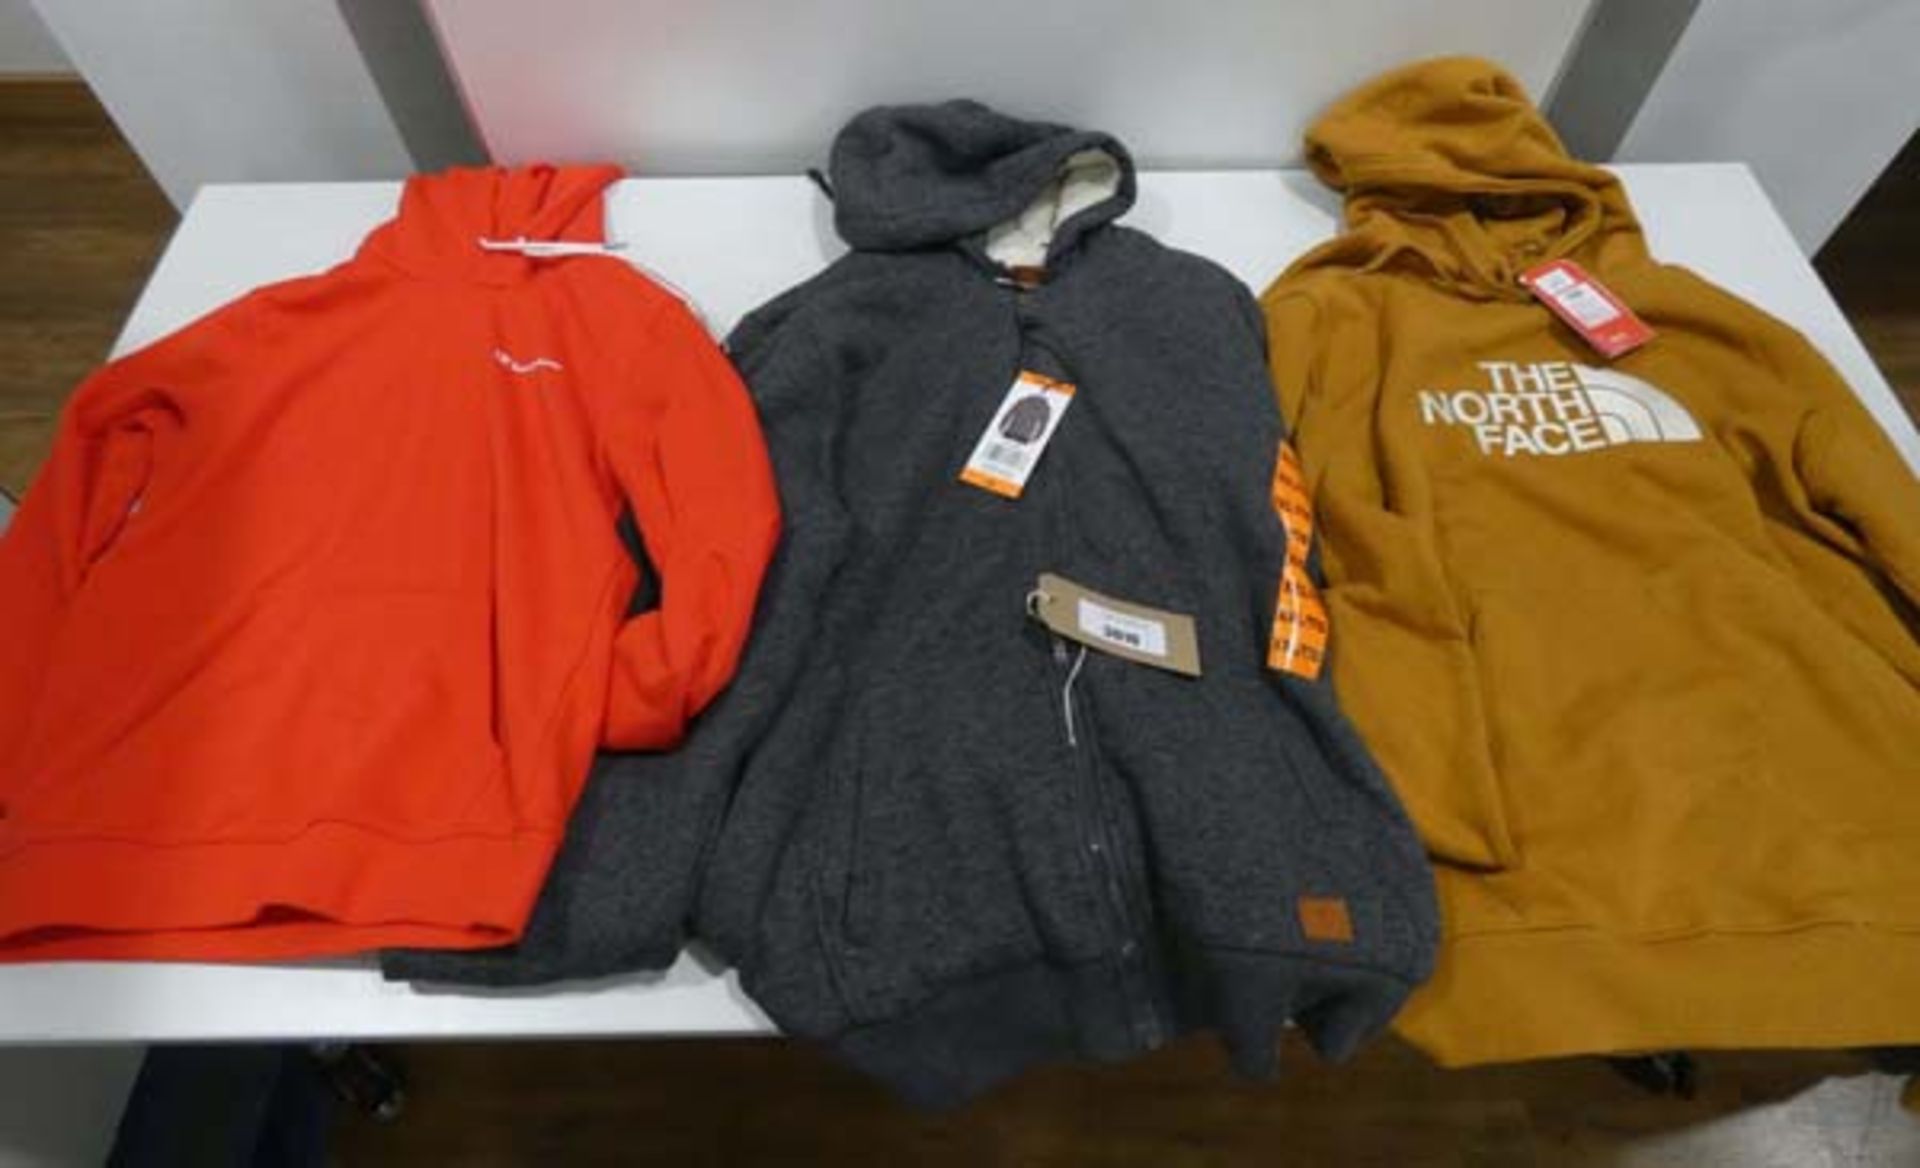 3 hoodies to include North Face XL tan hoodie, Buffalo dark grey XXL hoodie and Champion red